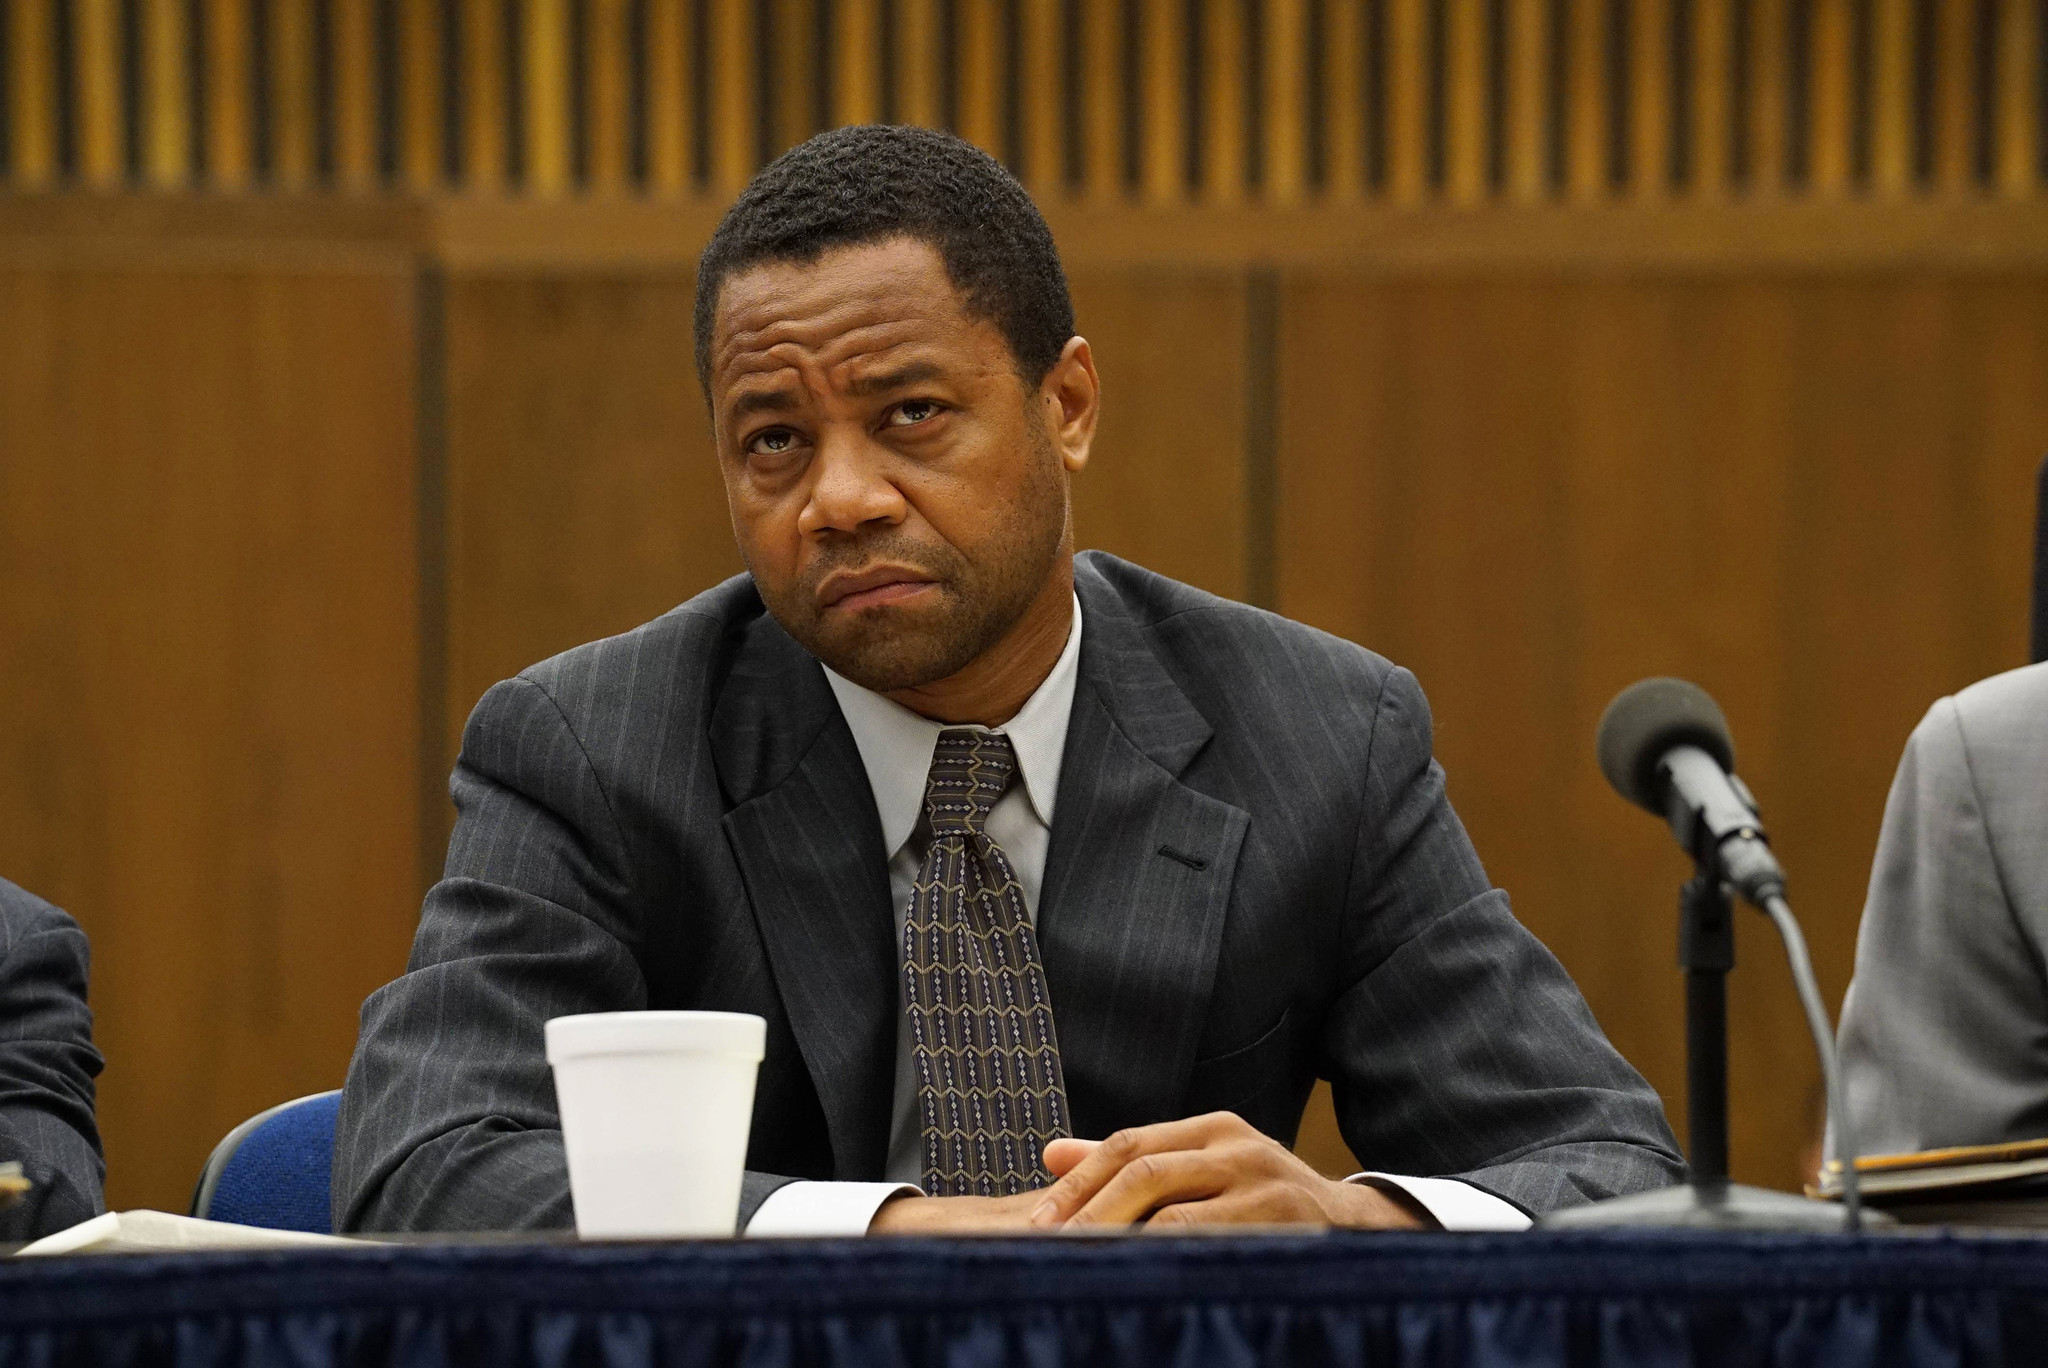 ‘The People vs. O.J. Simpson’ makes fact fiction and finds something profound in the process